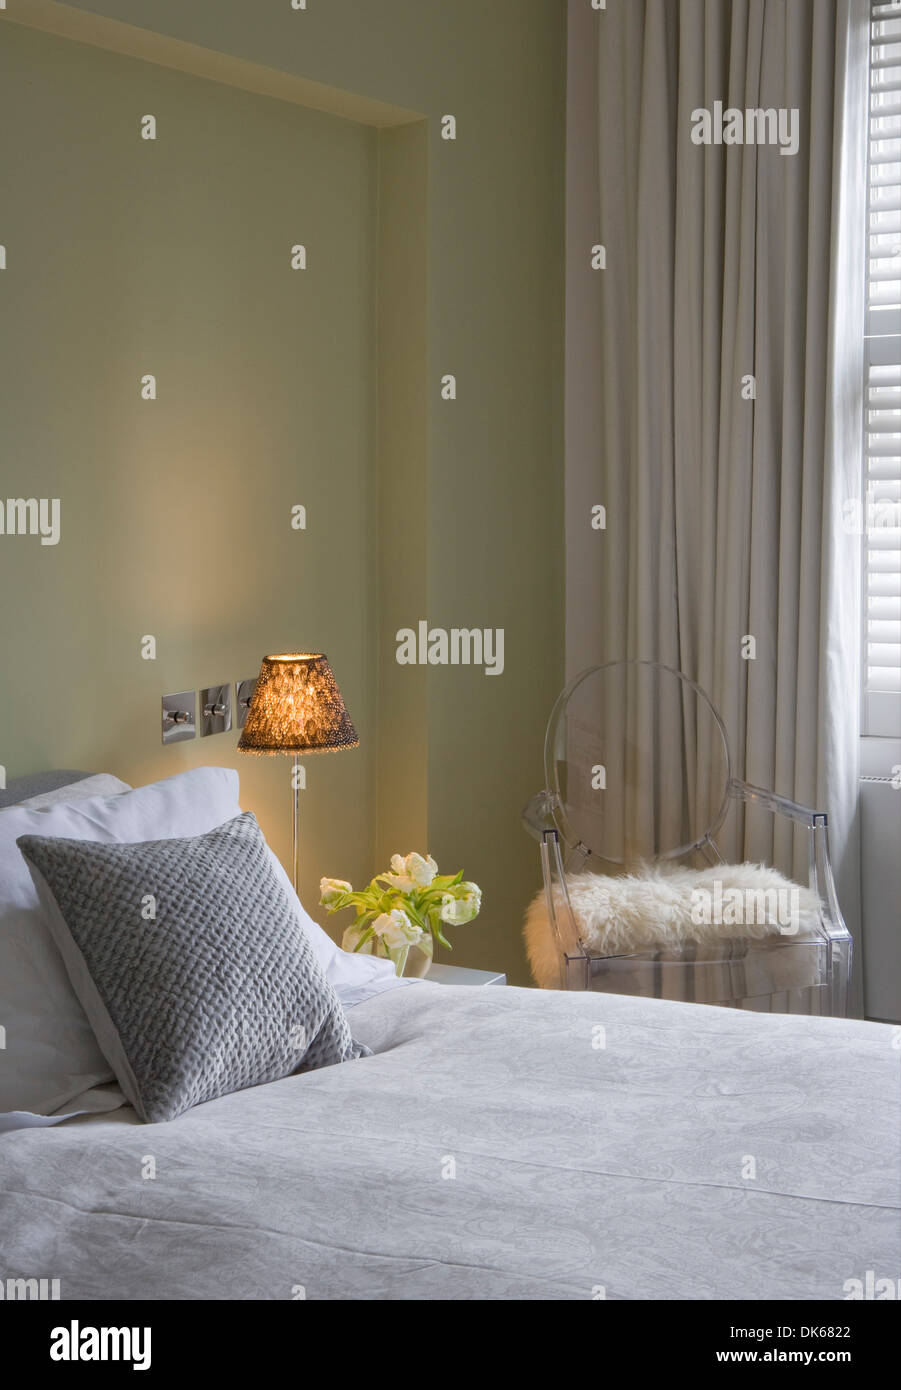 Elm Park Gardens, London, United Kingdom. Architect: May Ping Designs, 2013. Bedroom detail. Stock Photo